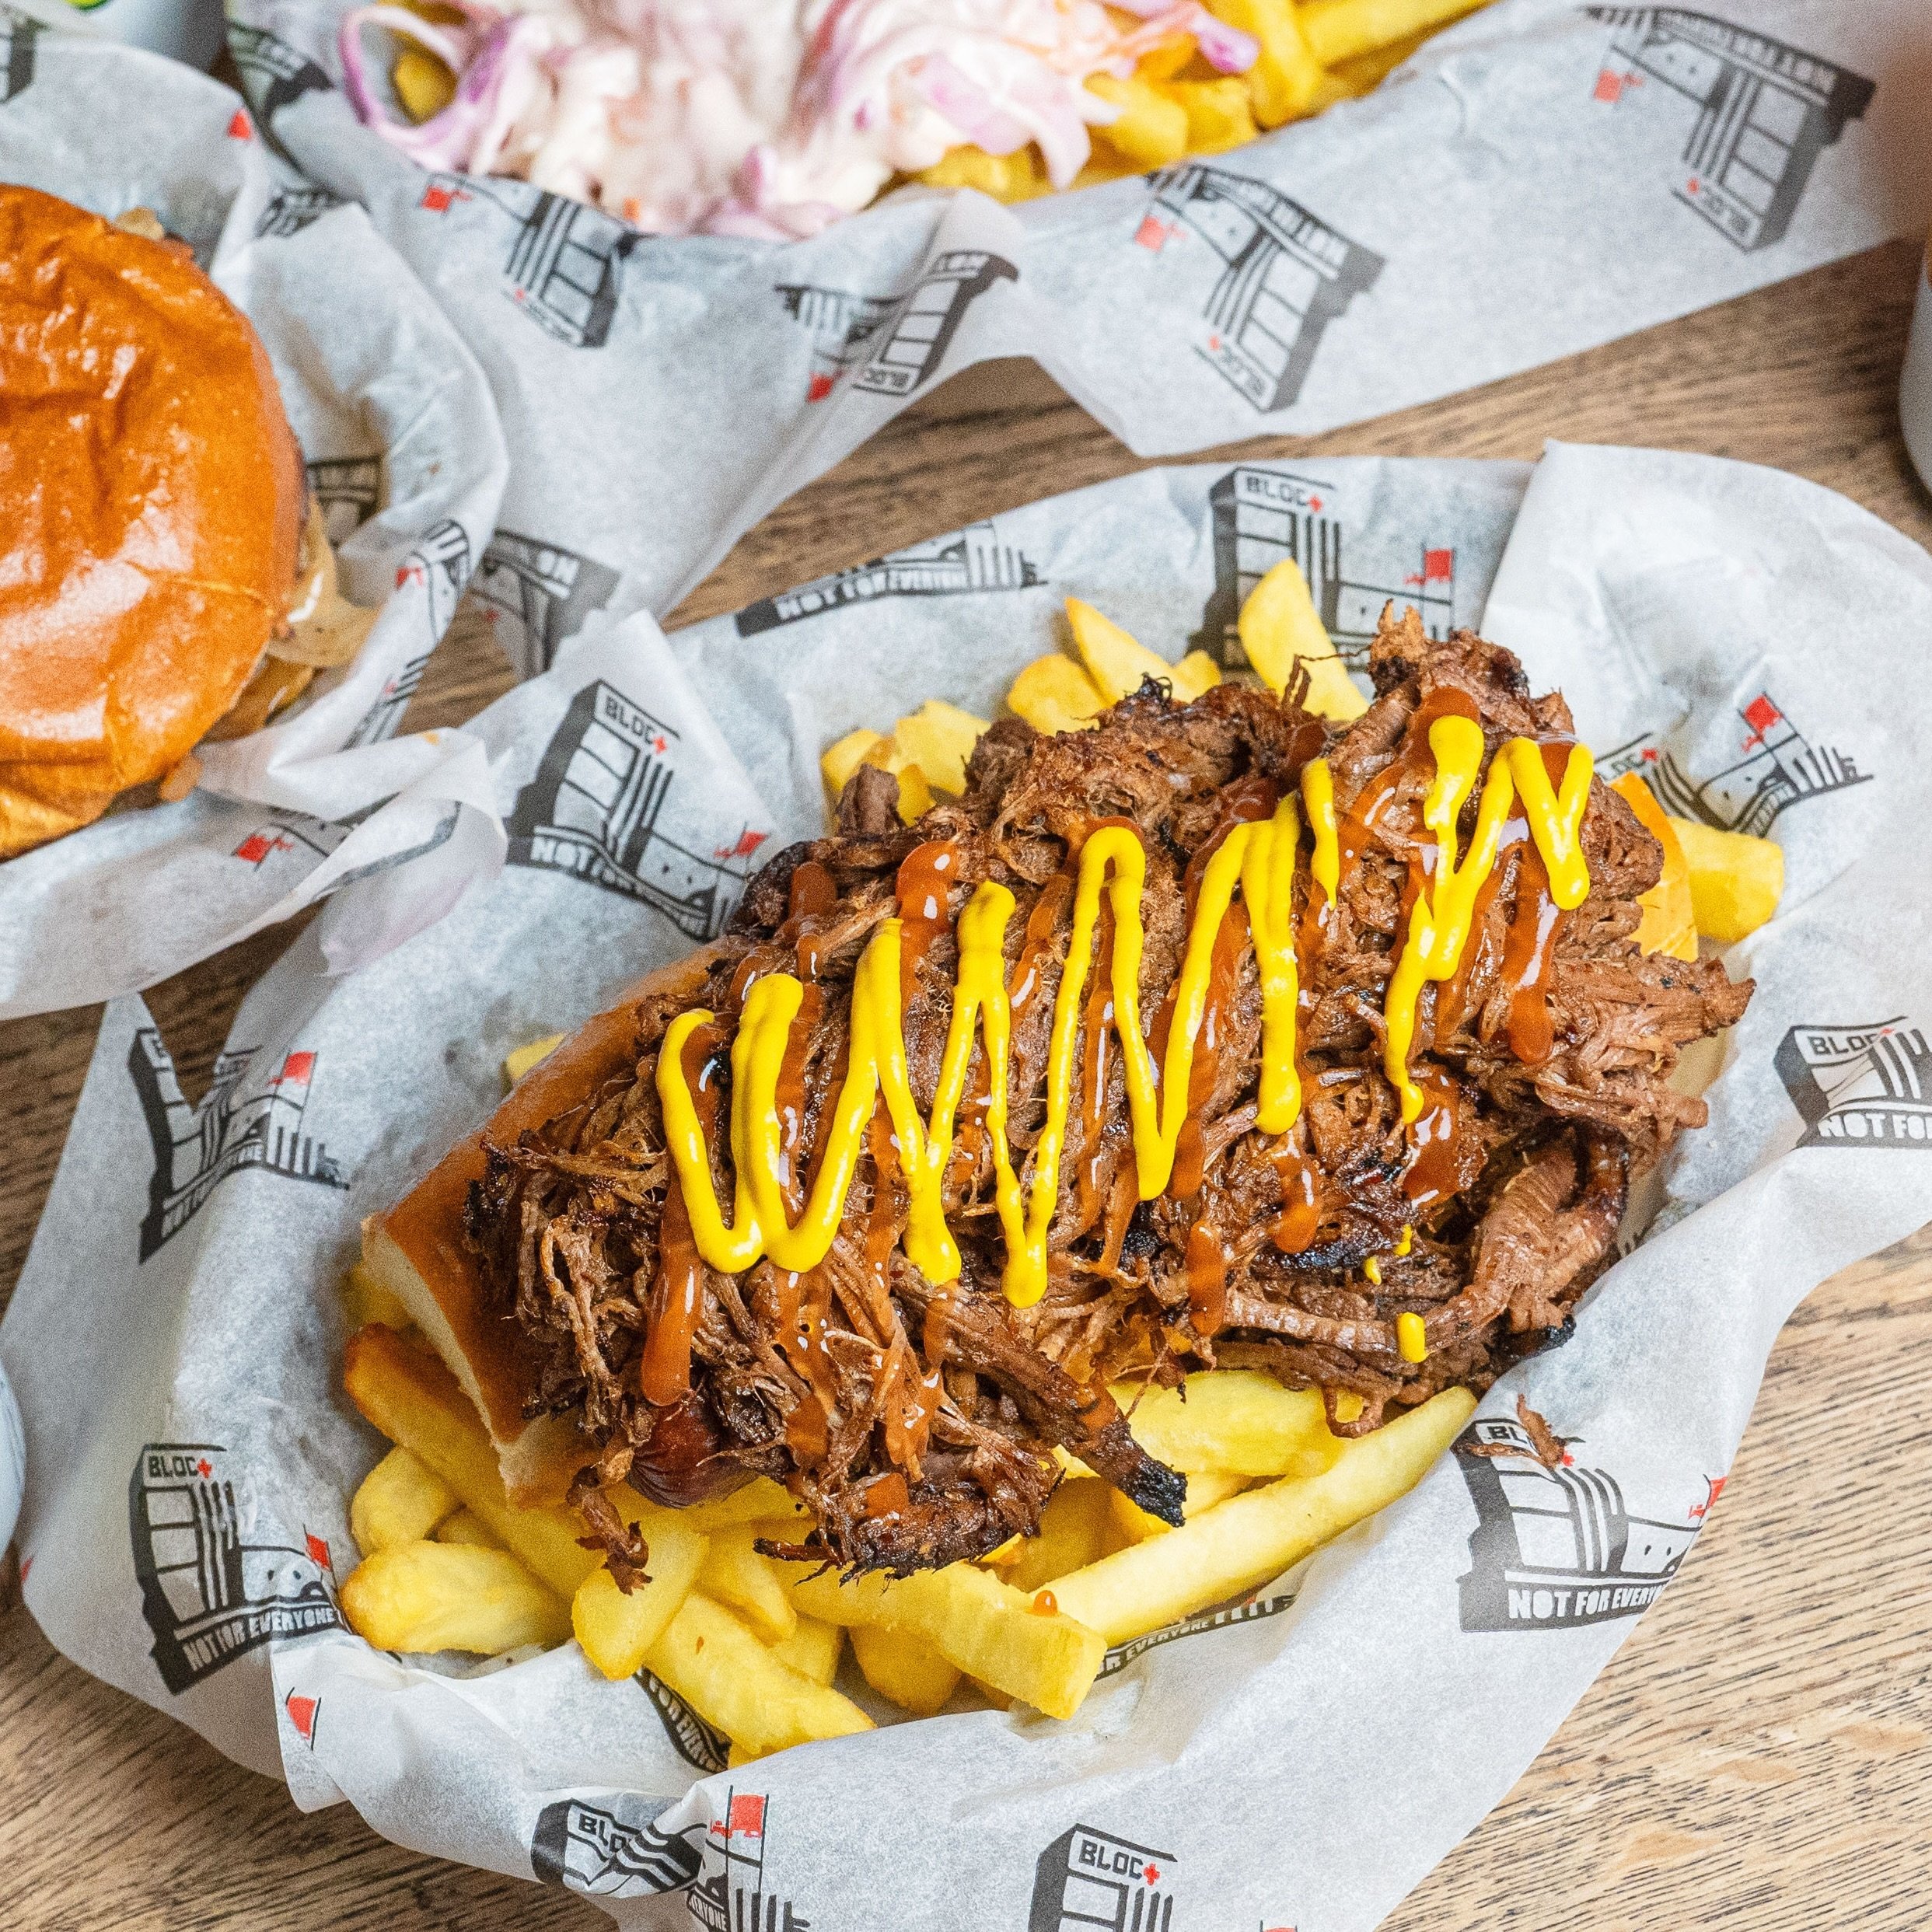 It&rsquo;s heating up for a cheeky BLOC+ Dog Friday 🌭🔥☀️ 6 inch smoked beechwood dog or @moving_mountainsuk vegan dog in a toasted bun served with fries! Load up with double brisket or your favourite toppings, we love to see it 🔥 #blocglasgow